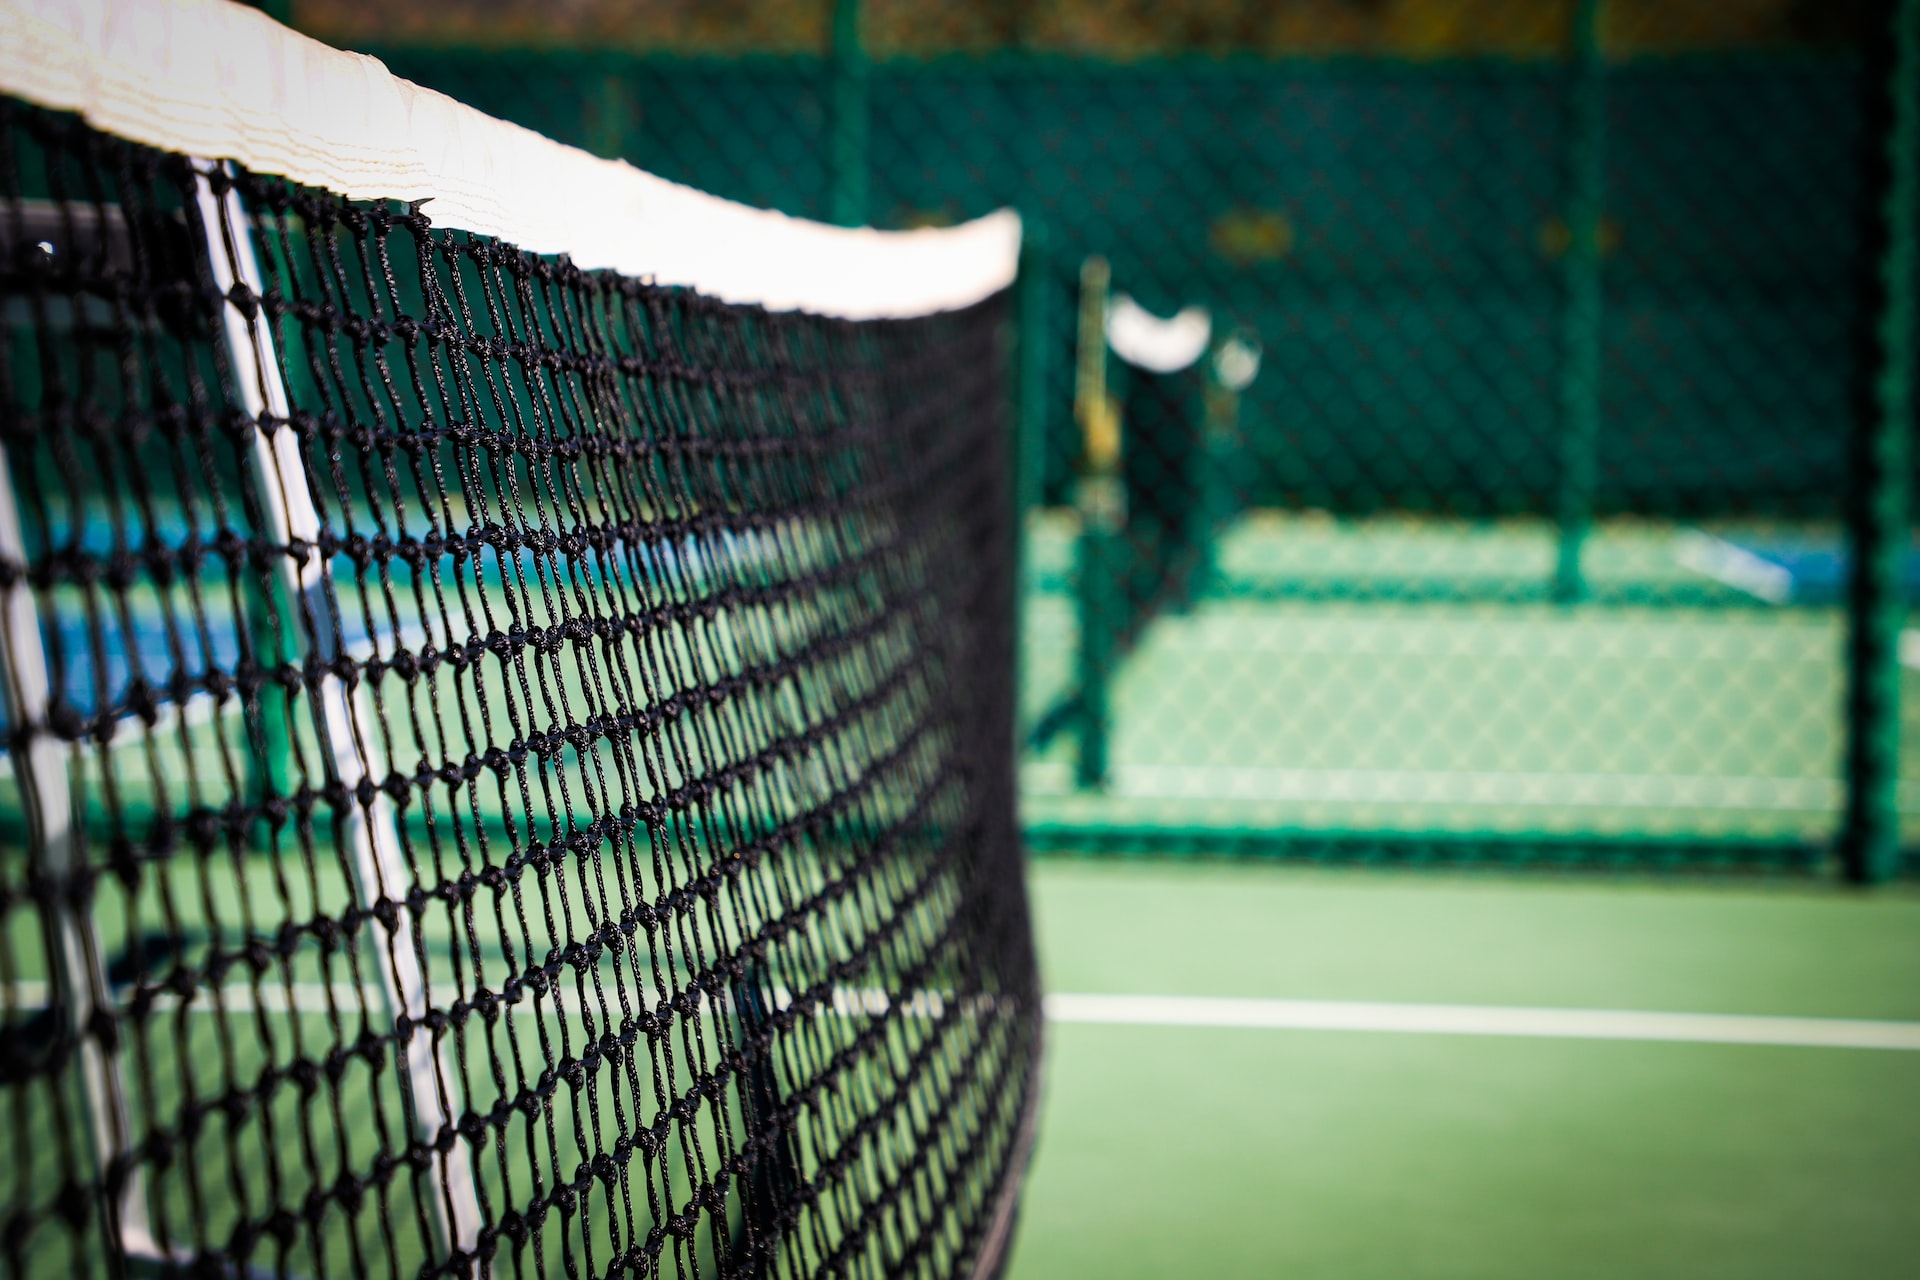 What is the impact of pickleball’s rapid popularity growth on tennis?